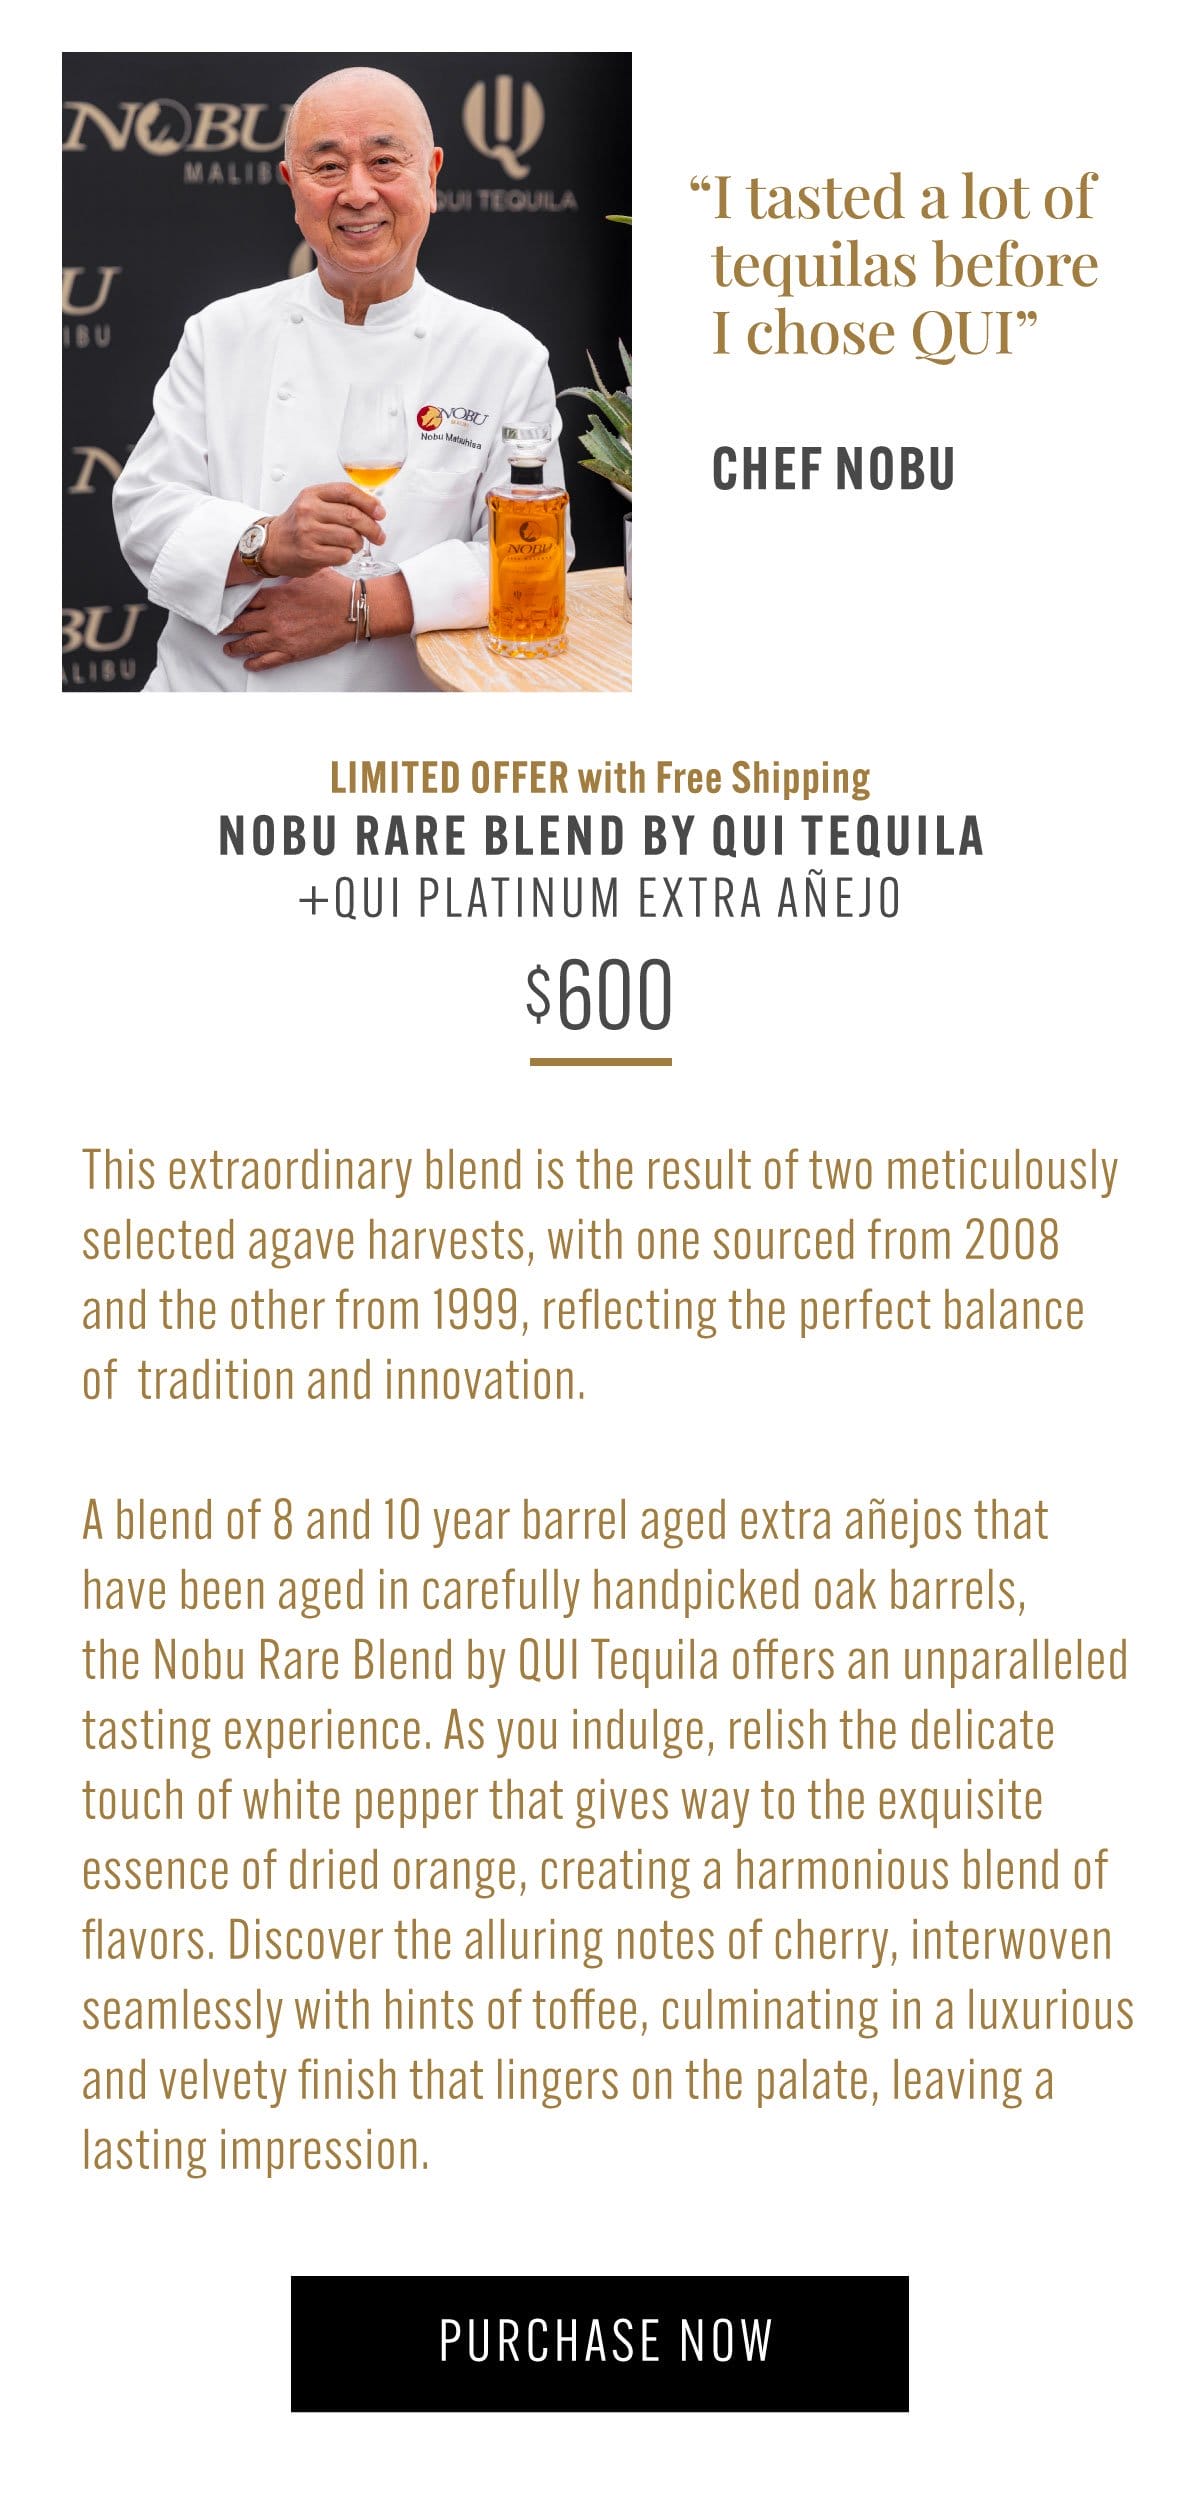 Limited offer with free shipping, Nobu Rare Blend by QUI Tequila plus QUI Platinum Extra Añejo. Price: \\$600. This extraordinary blend is the result of two meticulously selected agave harvests, with one sourced from 2008 and the other from 1999, reflecting the perfect balance of tradition and innovation.